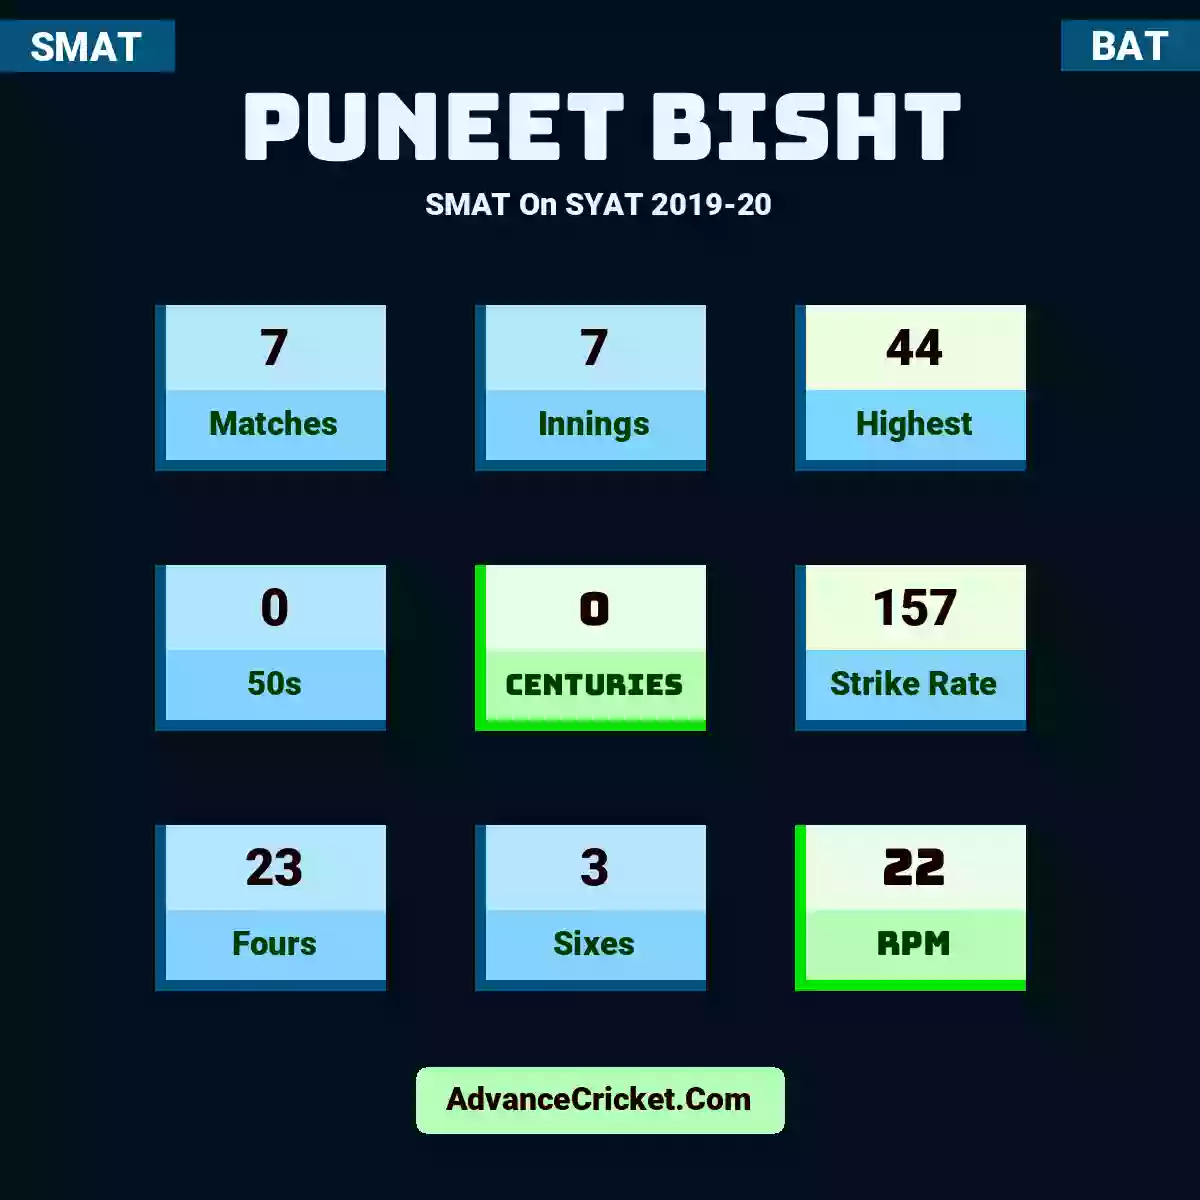 Puneet Bisht SMAT  On SYAT 2019-20, Puneet Bisht played 7 matches, scored 44 runs as highest, 0 half-centuries, and 0 centuries, with a strike rate of 157. P.Bisht hit 23 fours and 3 sixes, with an RPM of 22.